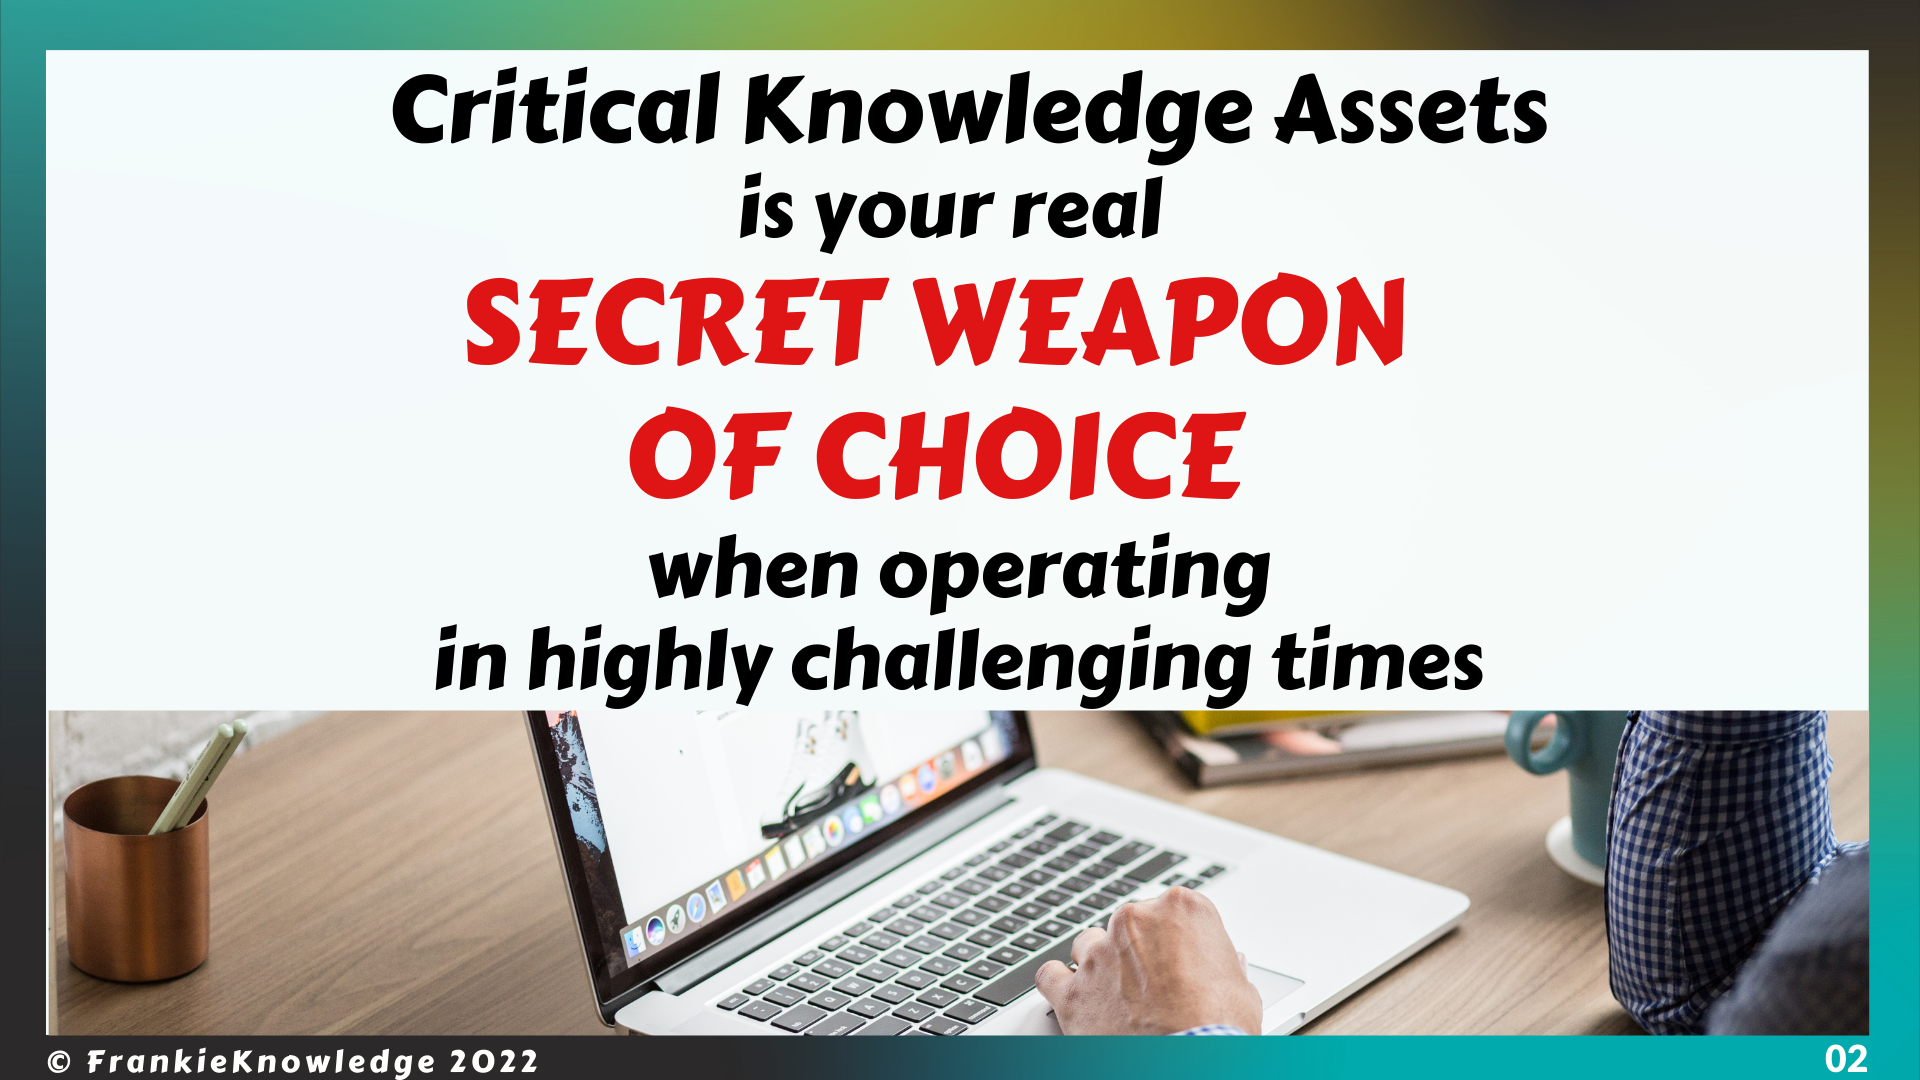 Critical Knowledge Assets is your real SECRET WEAPON OF CHOICE when operating in highly challenging times